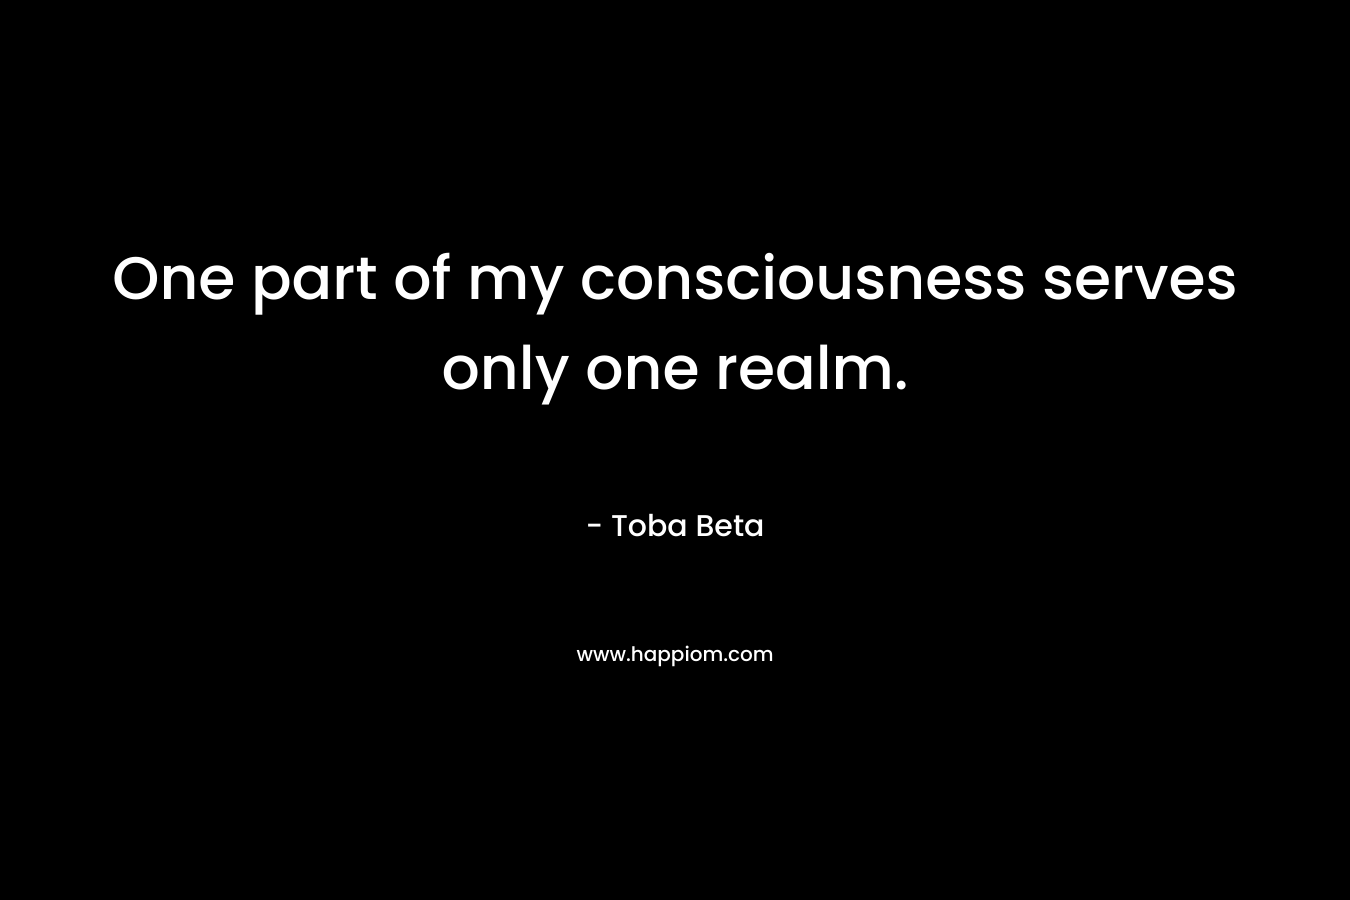 One part of my consciousness serves only one realm.